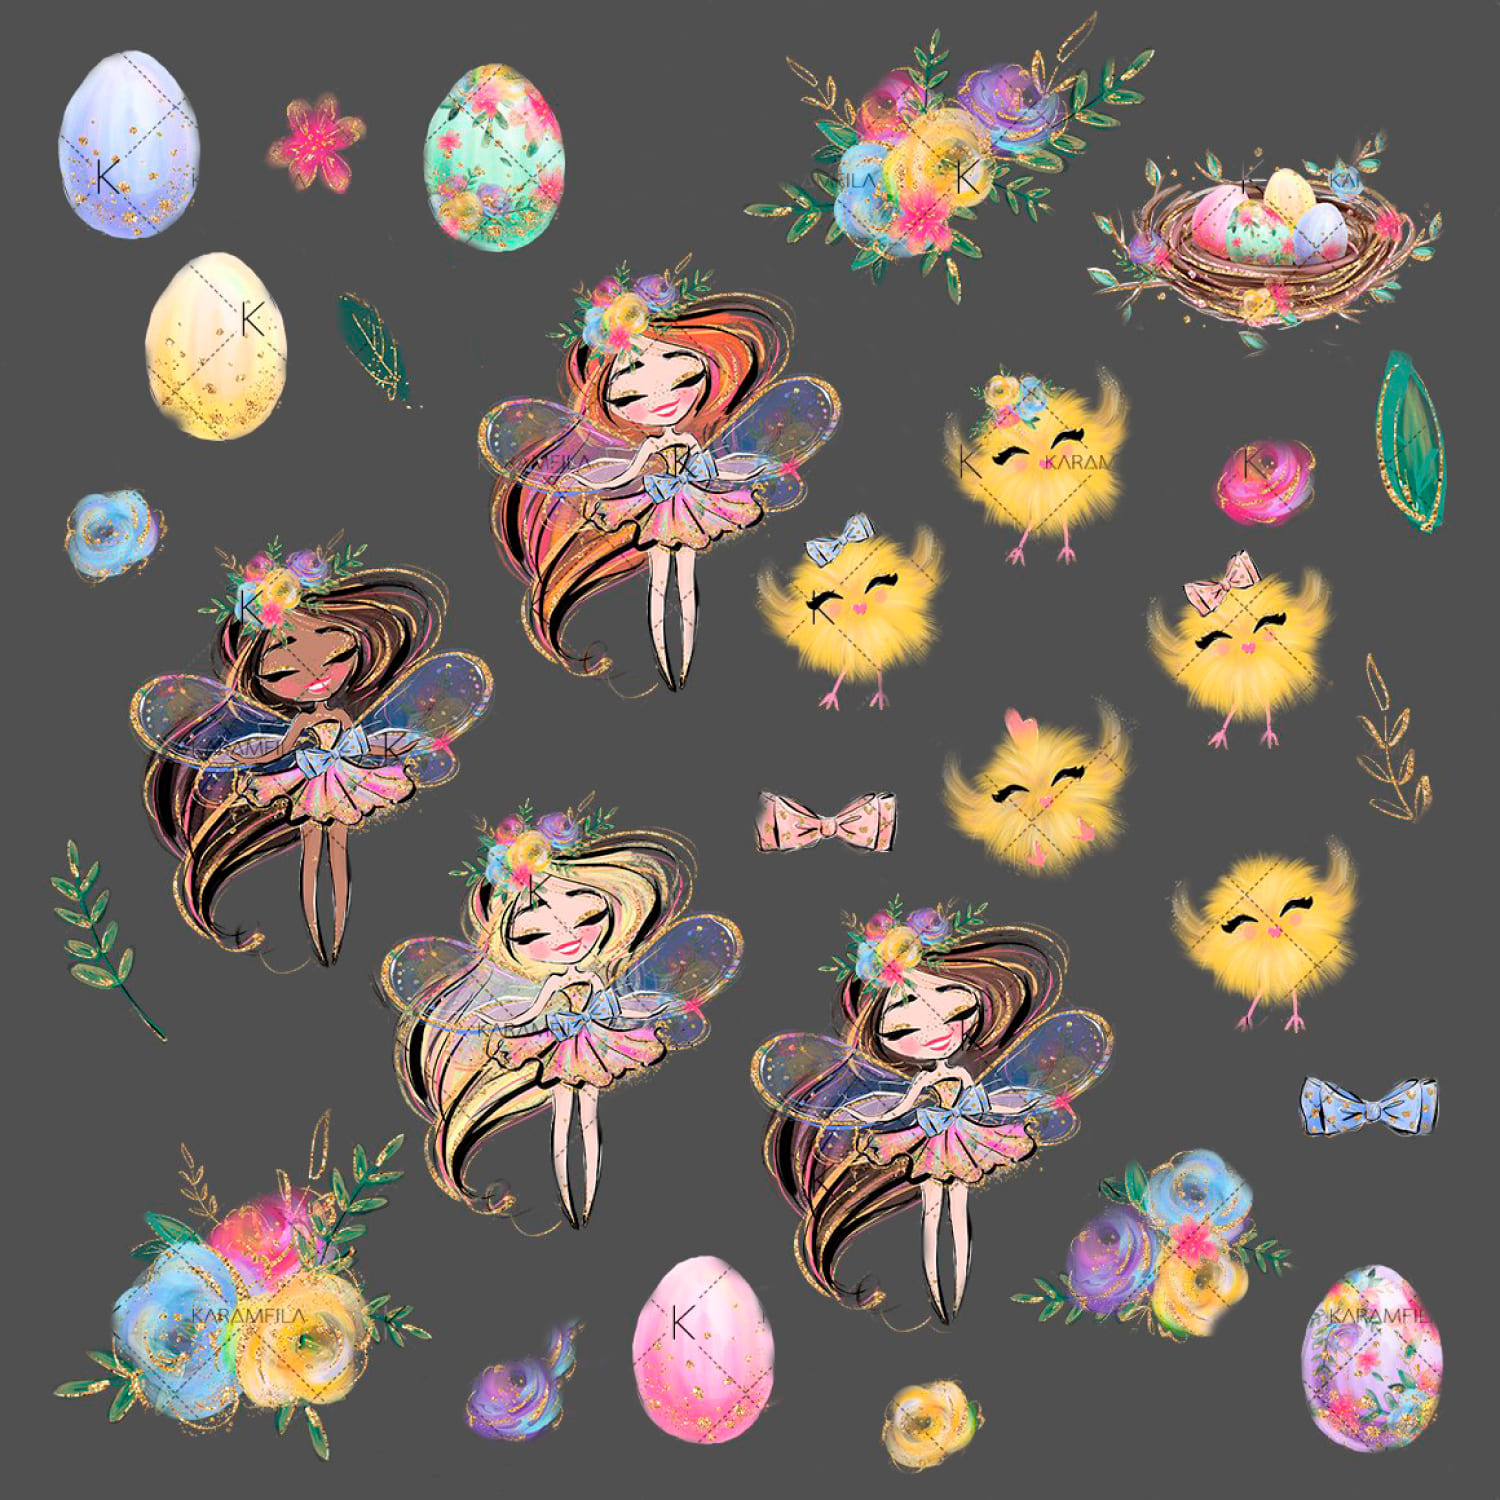 A collection of chicks, fairies and eggs on a gray background.